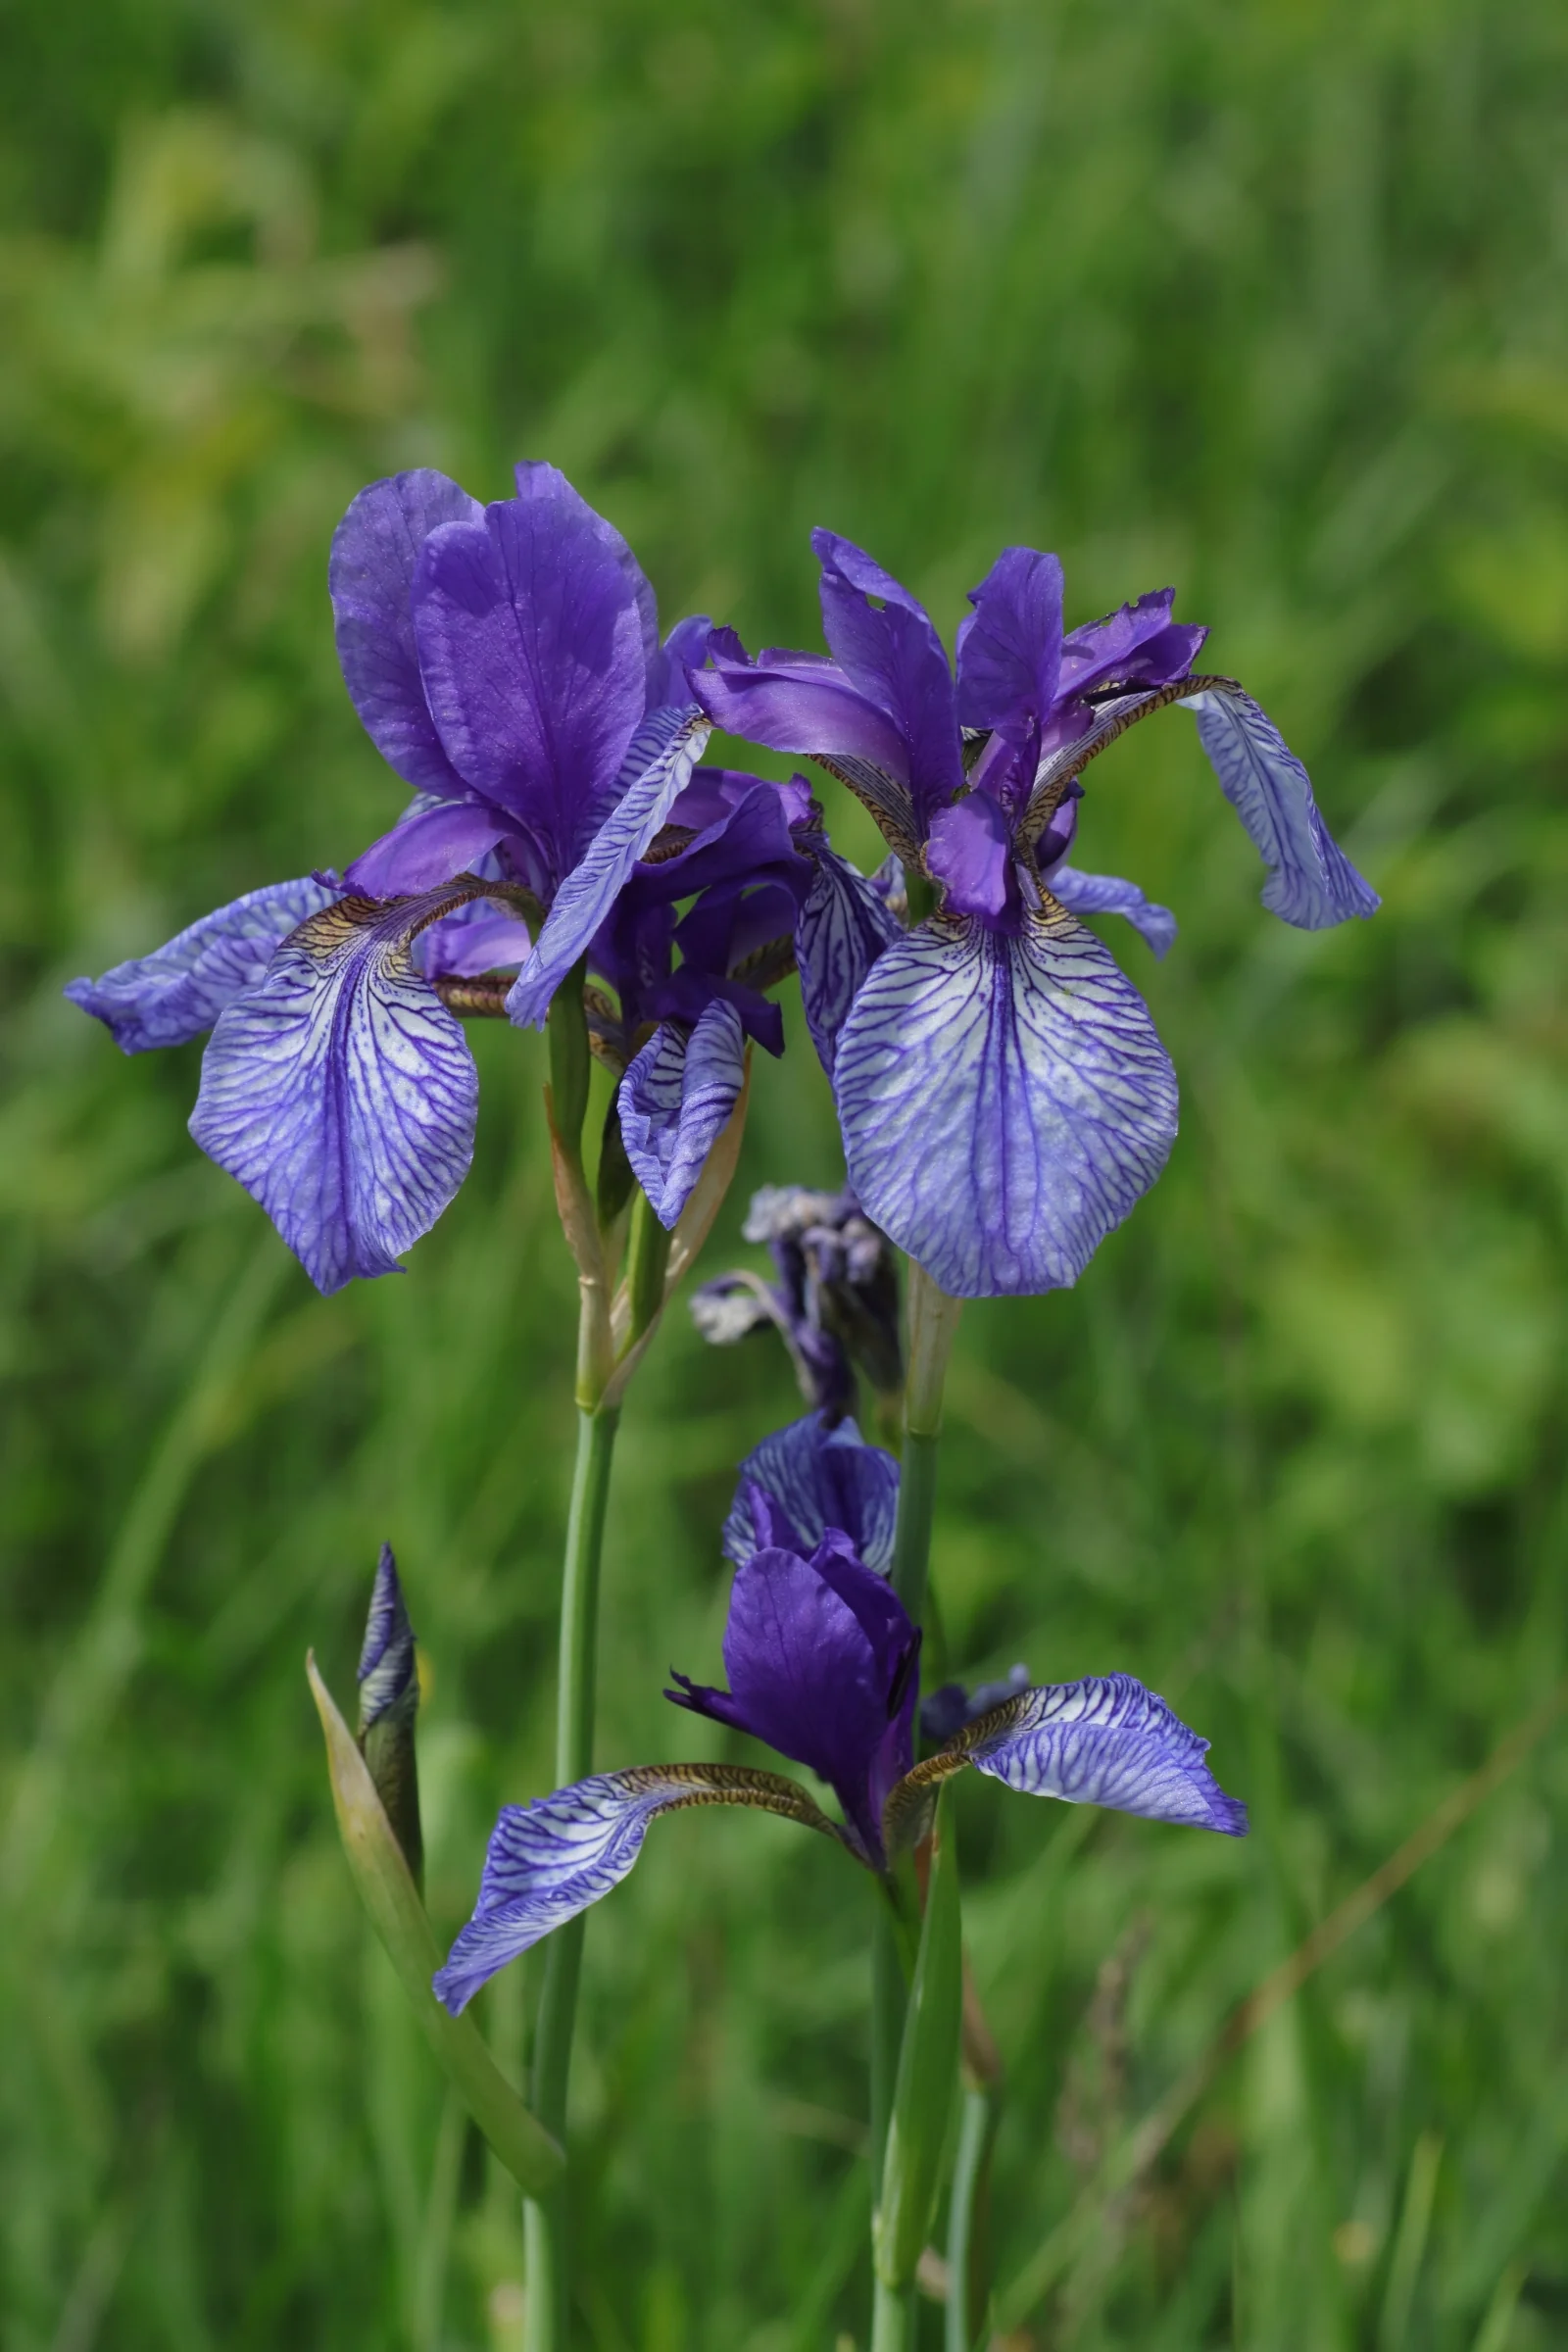 The siberian iris in the Eriskircher Ried. The brilliant violet flowers are in front of the green meadow.